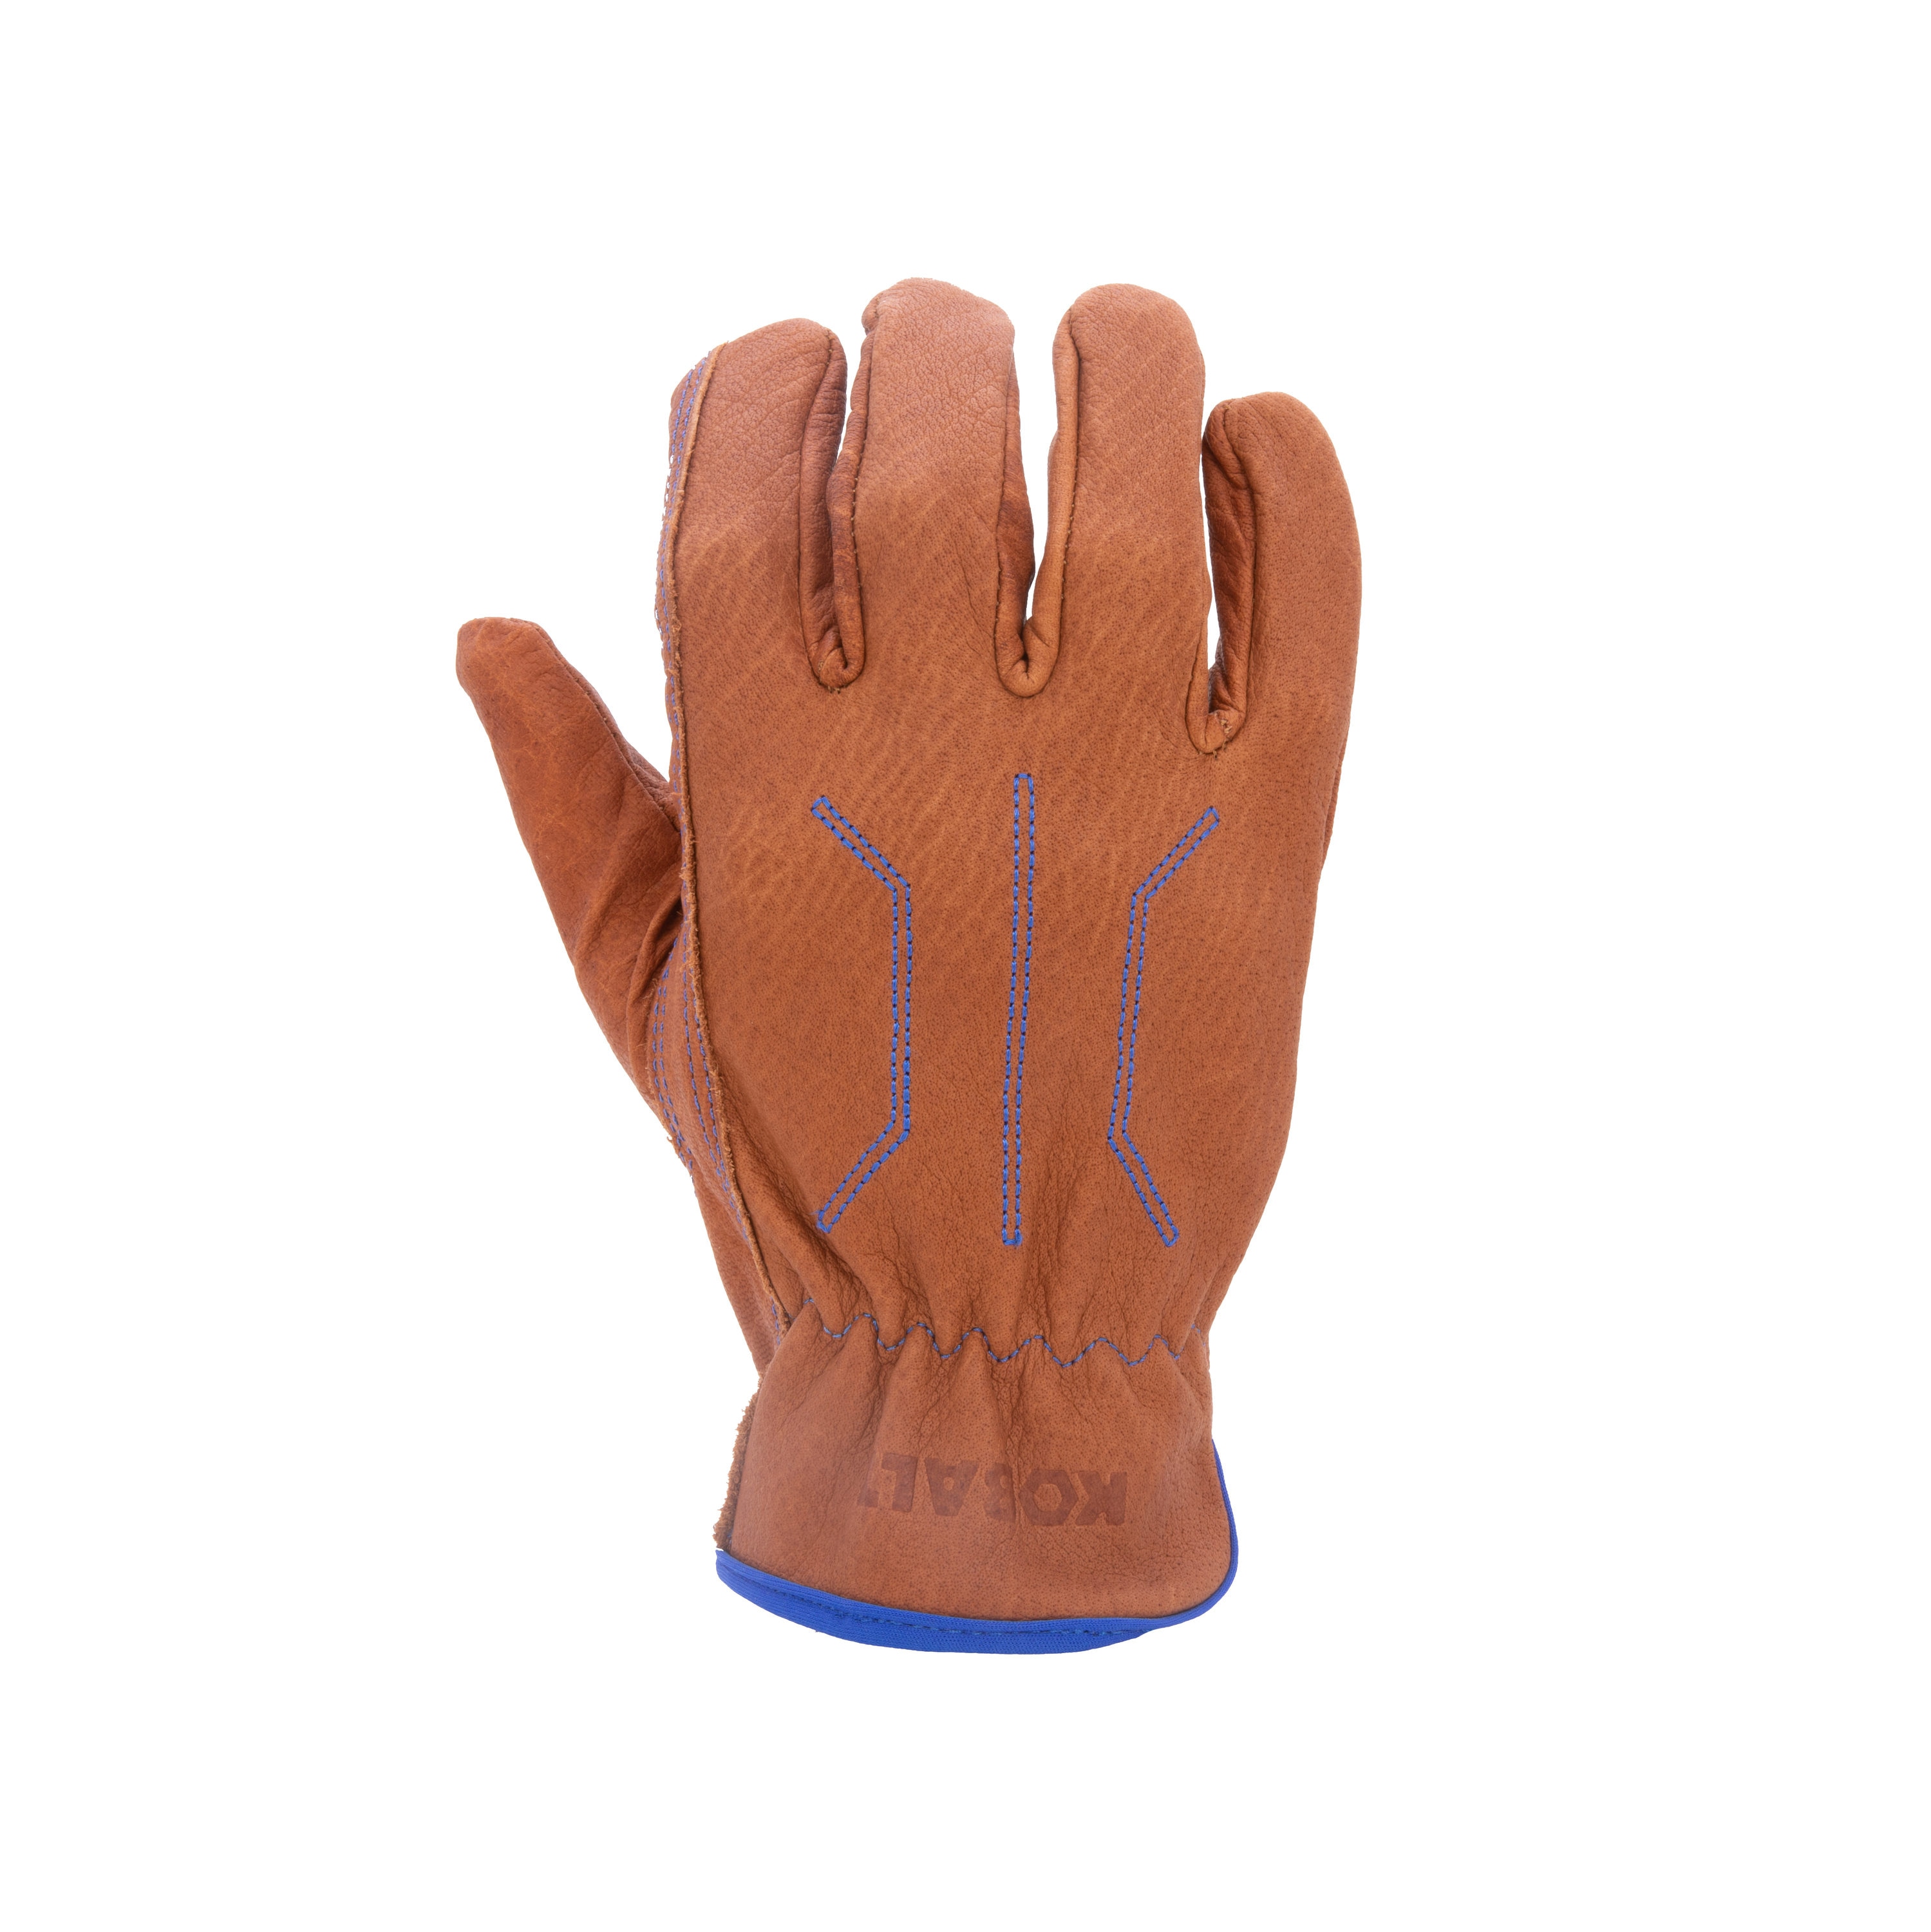 Durable and resistant bovine leather work gloves for driving trucks, w